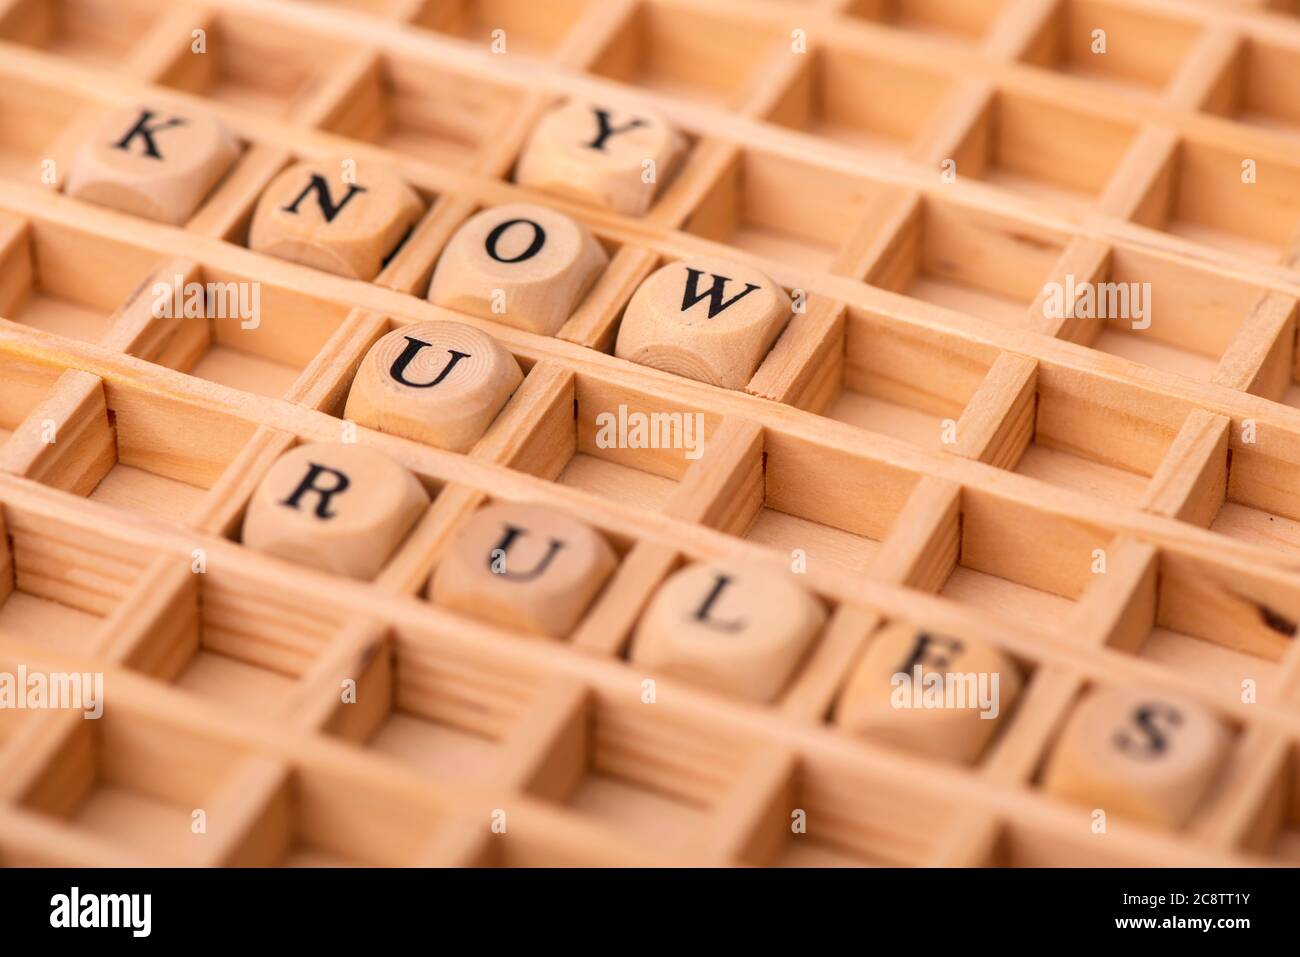 Word Cloud für Know Your Rules Stockfoto